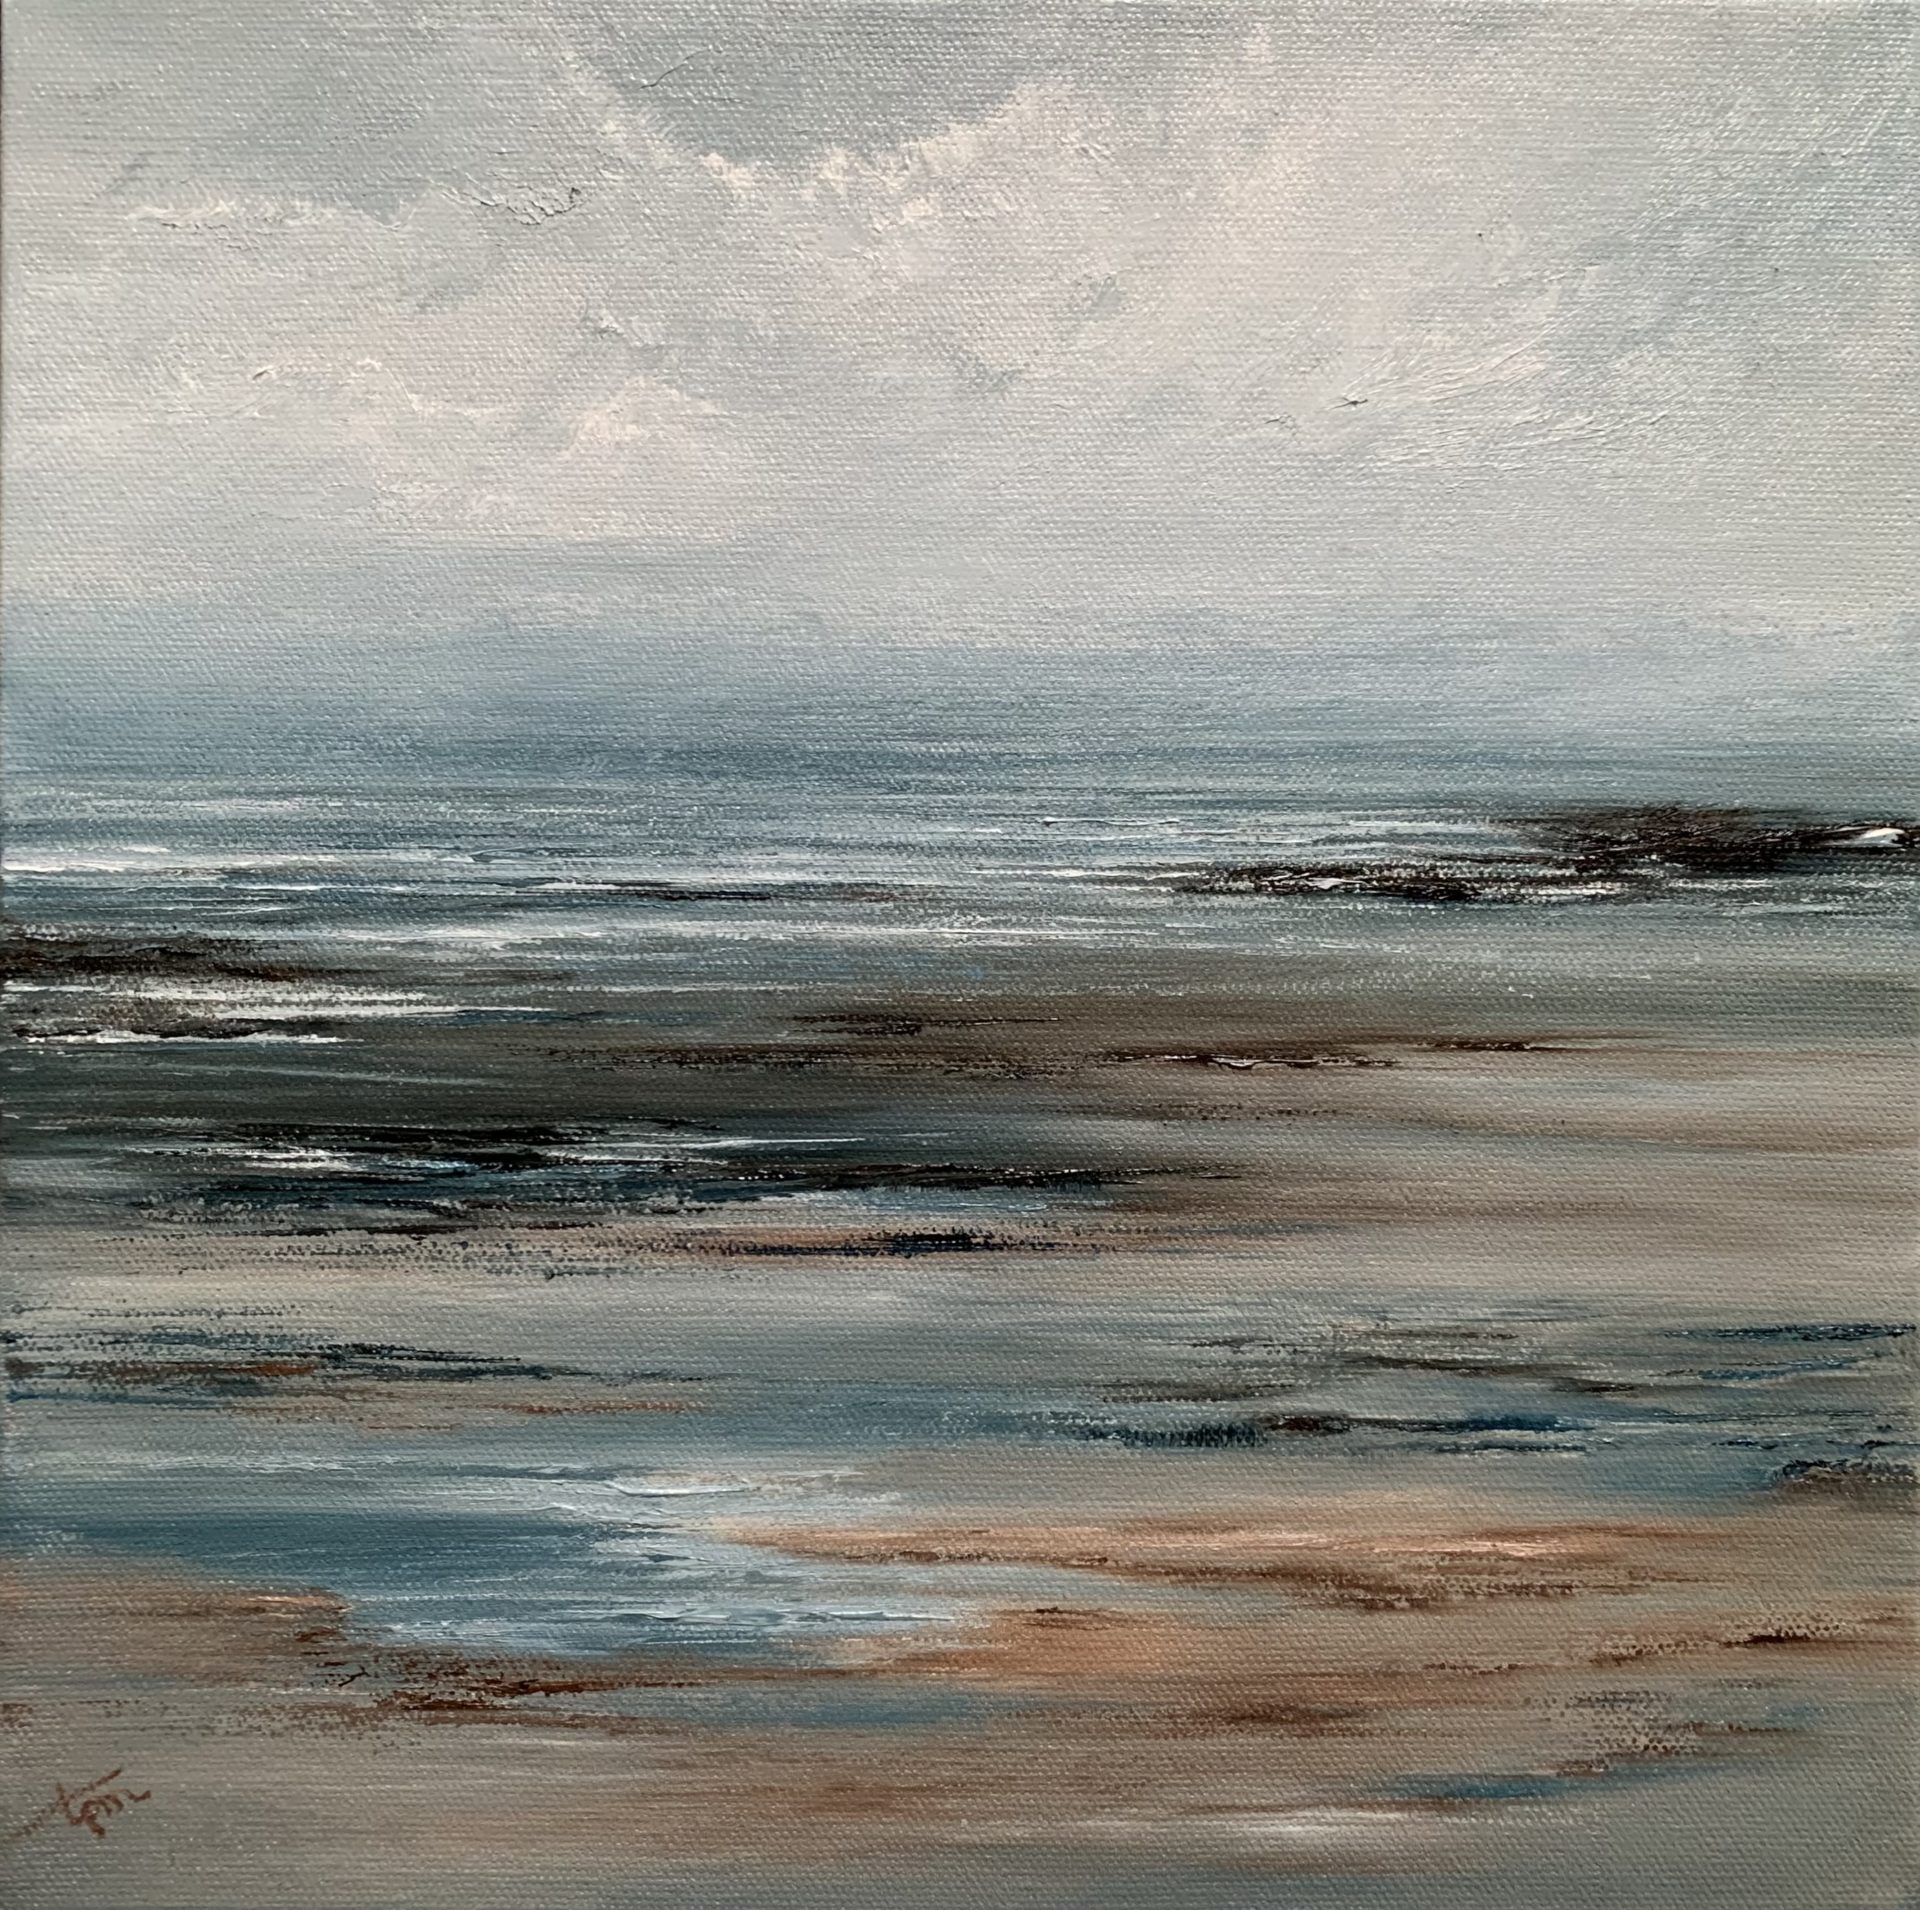 Photo of original seascape oil painting by Tisha Mark, "Tide Pools I" 12"x12 oil on canvas (2022). Seascape painting in cool blues and grays with contrasting warm tones of brown featuring textures found in tide pools during a wintertime visit to a beach.